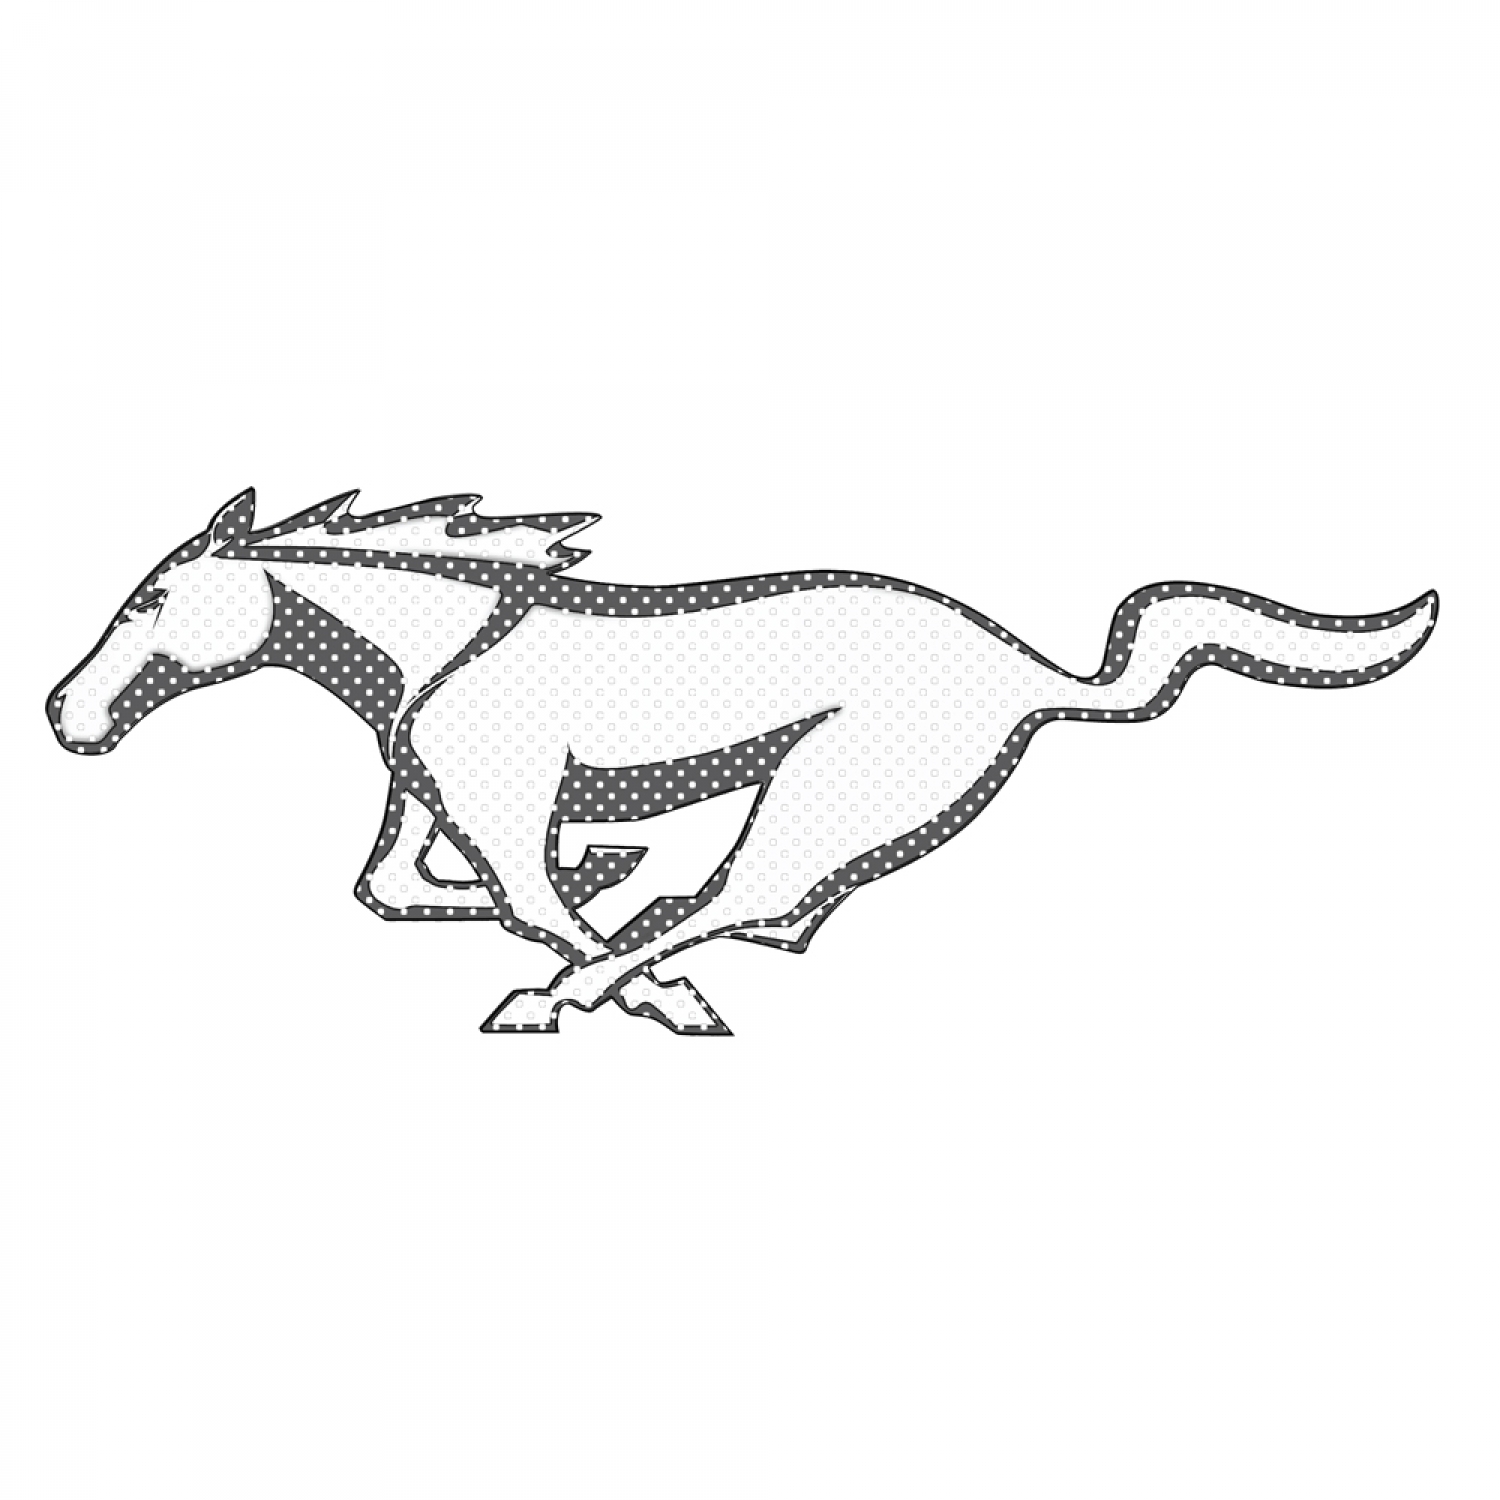 Ford Mustang Logo Drawing at GetDrawings.com | Free for personal use